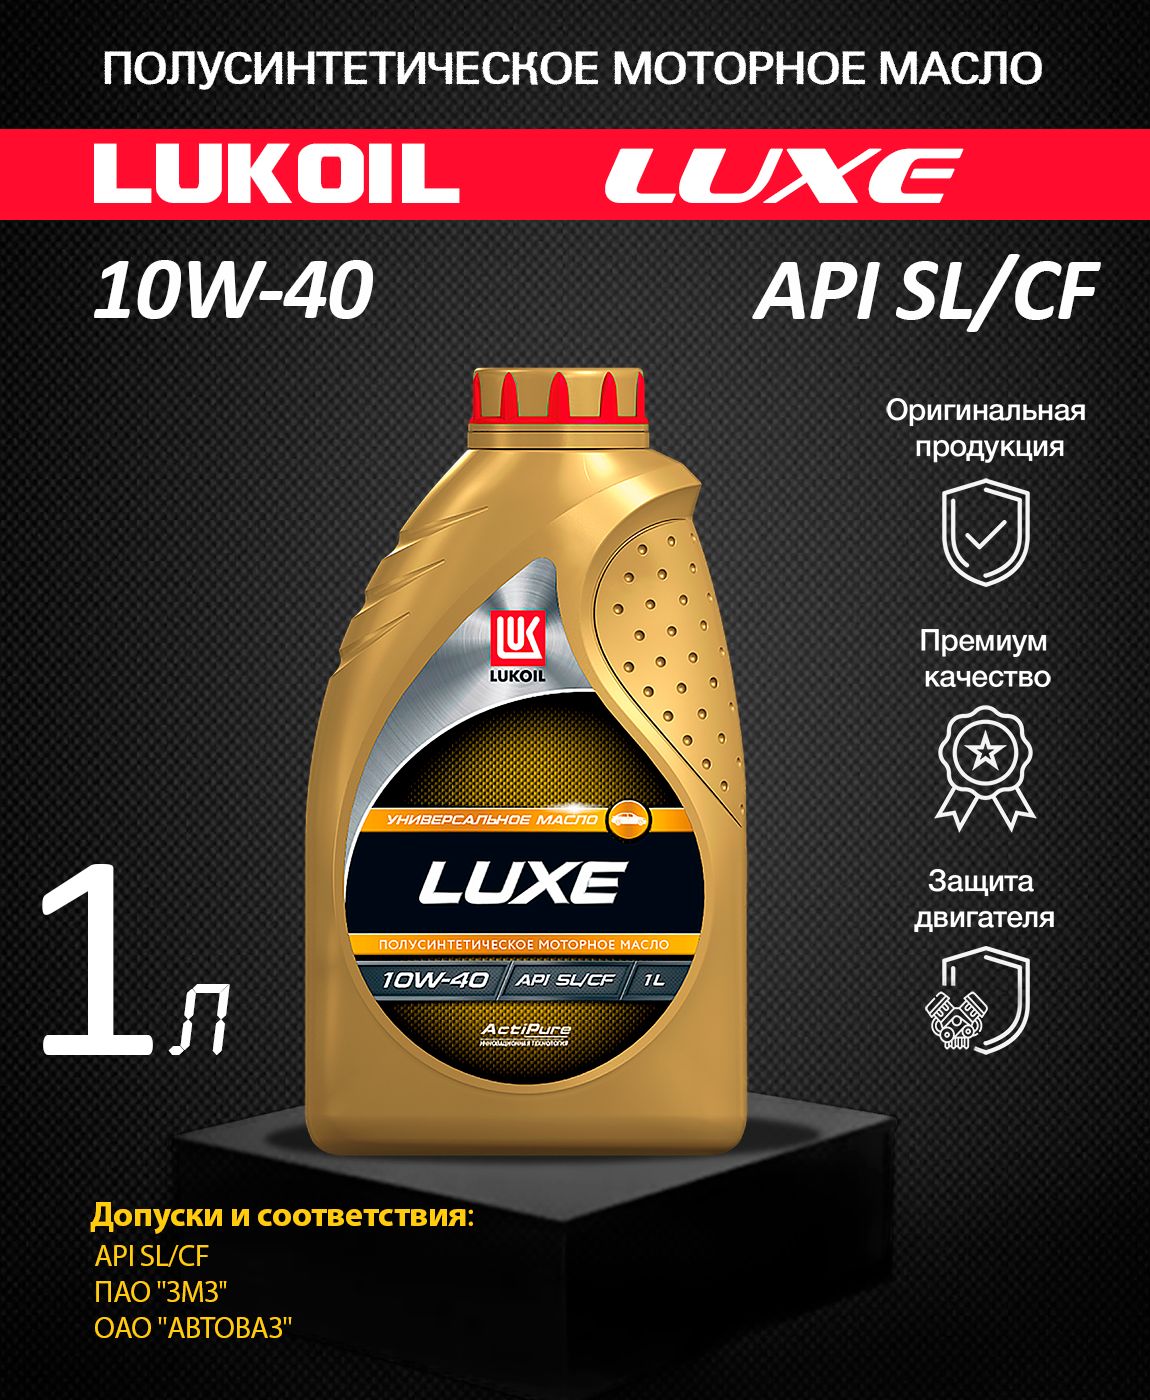 Моторное масло лукойл люкс отзывы. Lukoil Luxe 10w-40. Lukoil Luxe Synthetic 5w-40 (ACEA a3/b4-08; API SM/CF). Масло моторное полусинтетическое Люкс 10w-40, SL/CF 4 Л. Lukoil арт. 19188. Масло Лукойл 10w 40 полусинтетика.